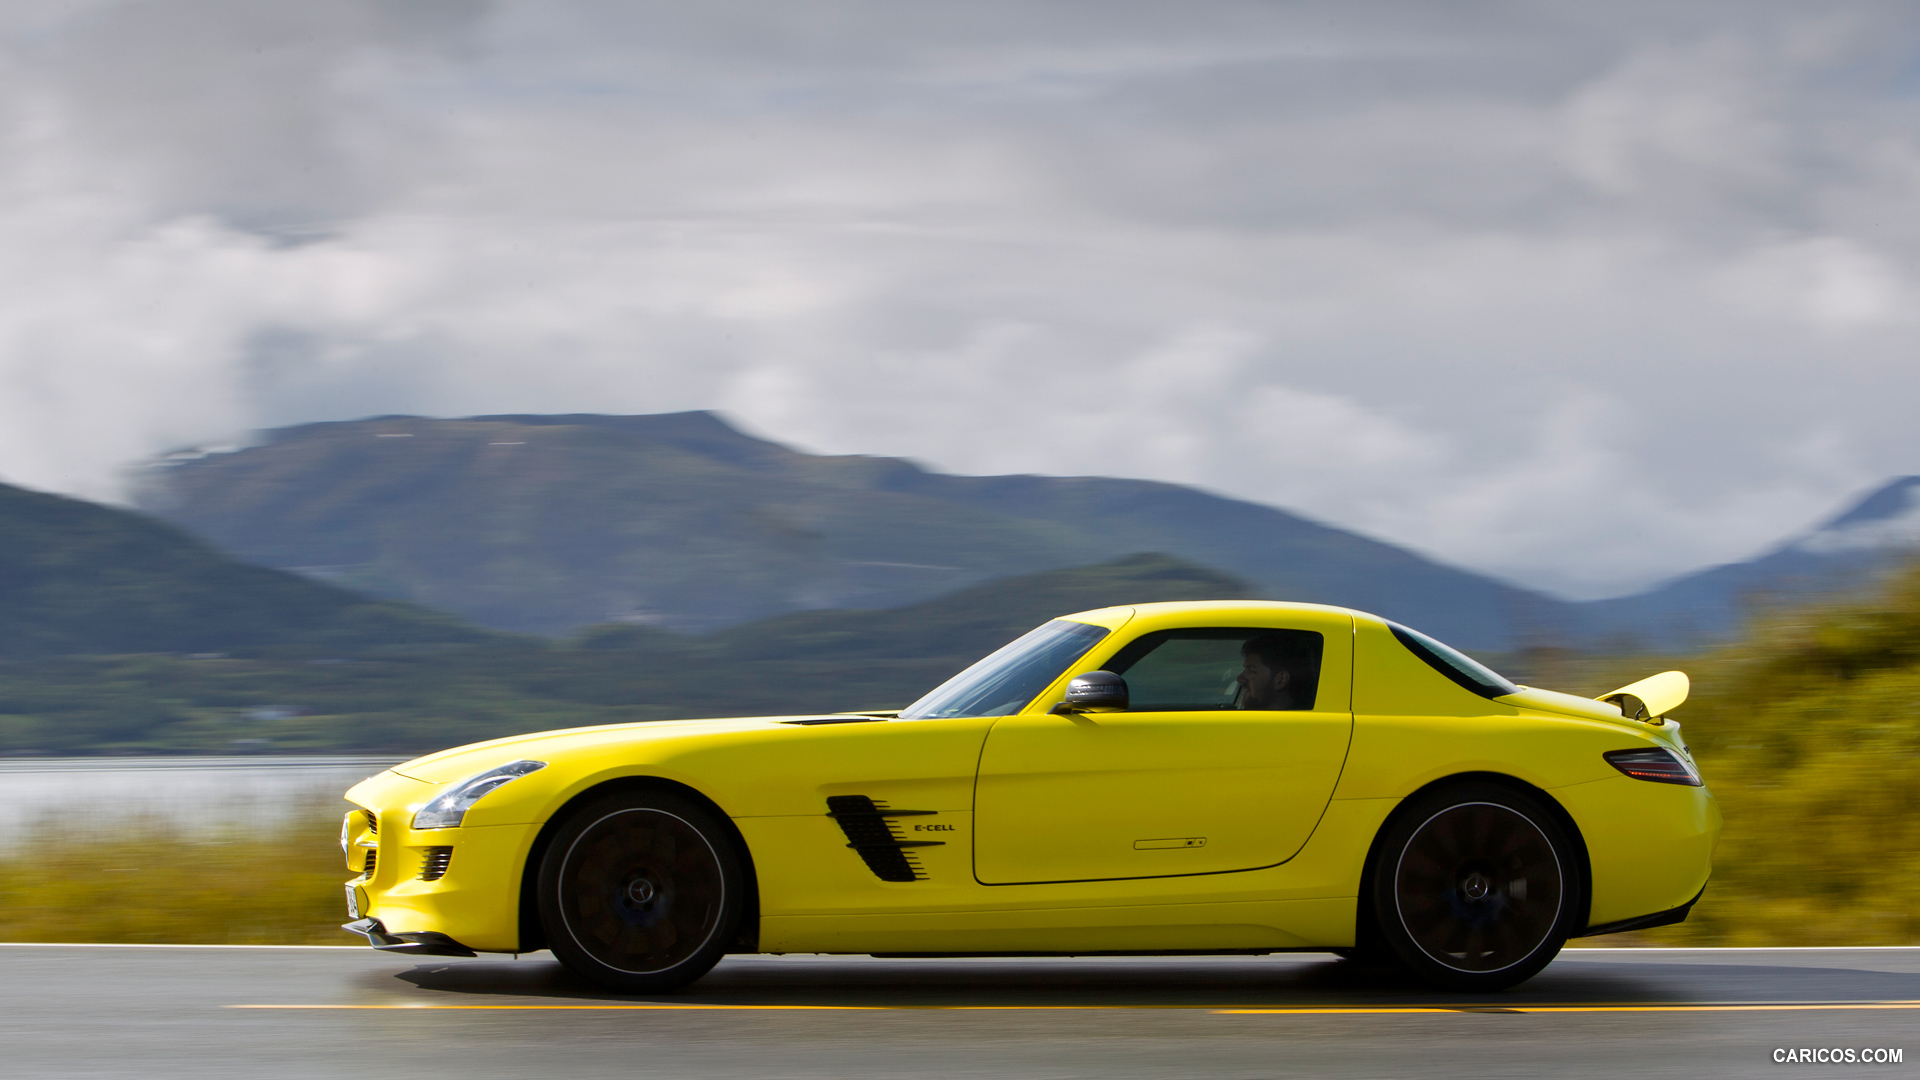 Mercedes-Benz SLS AMG E-CELL Concept  - Side, #10 of 60